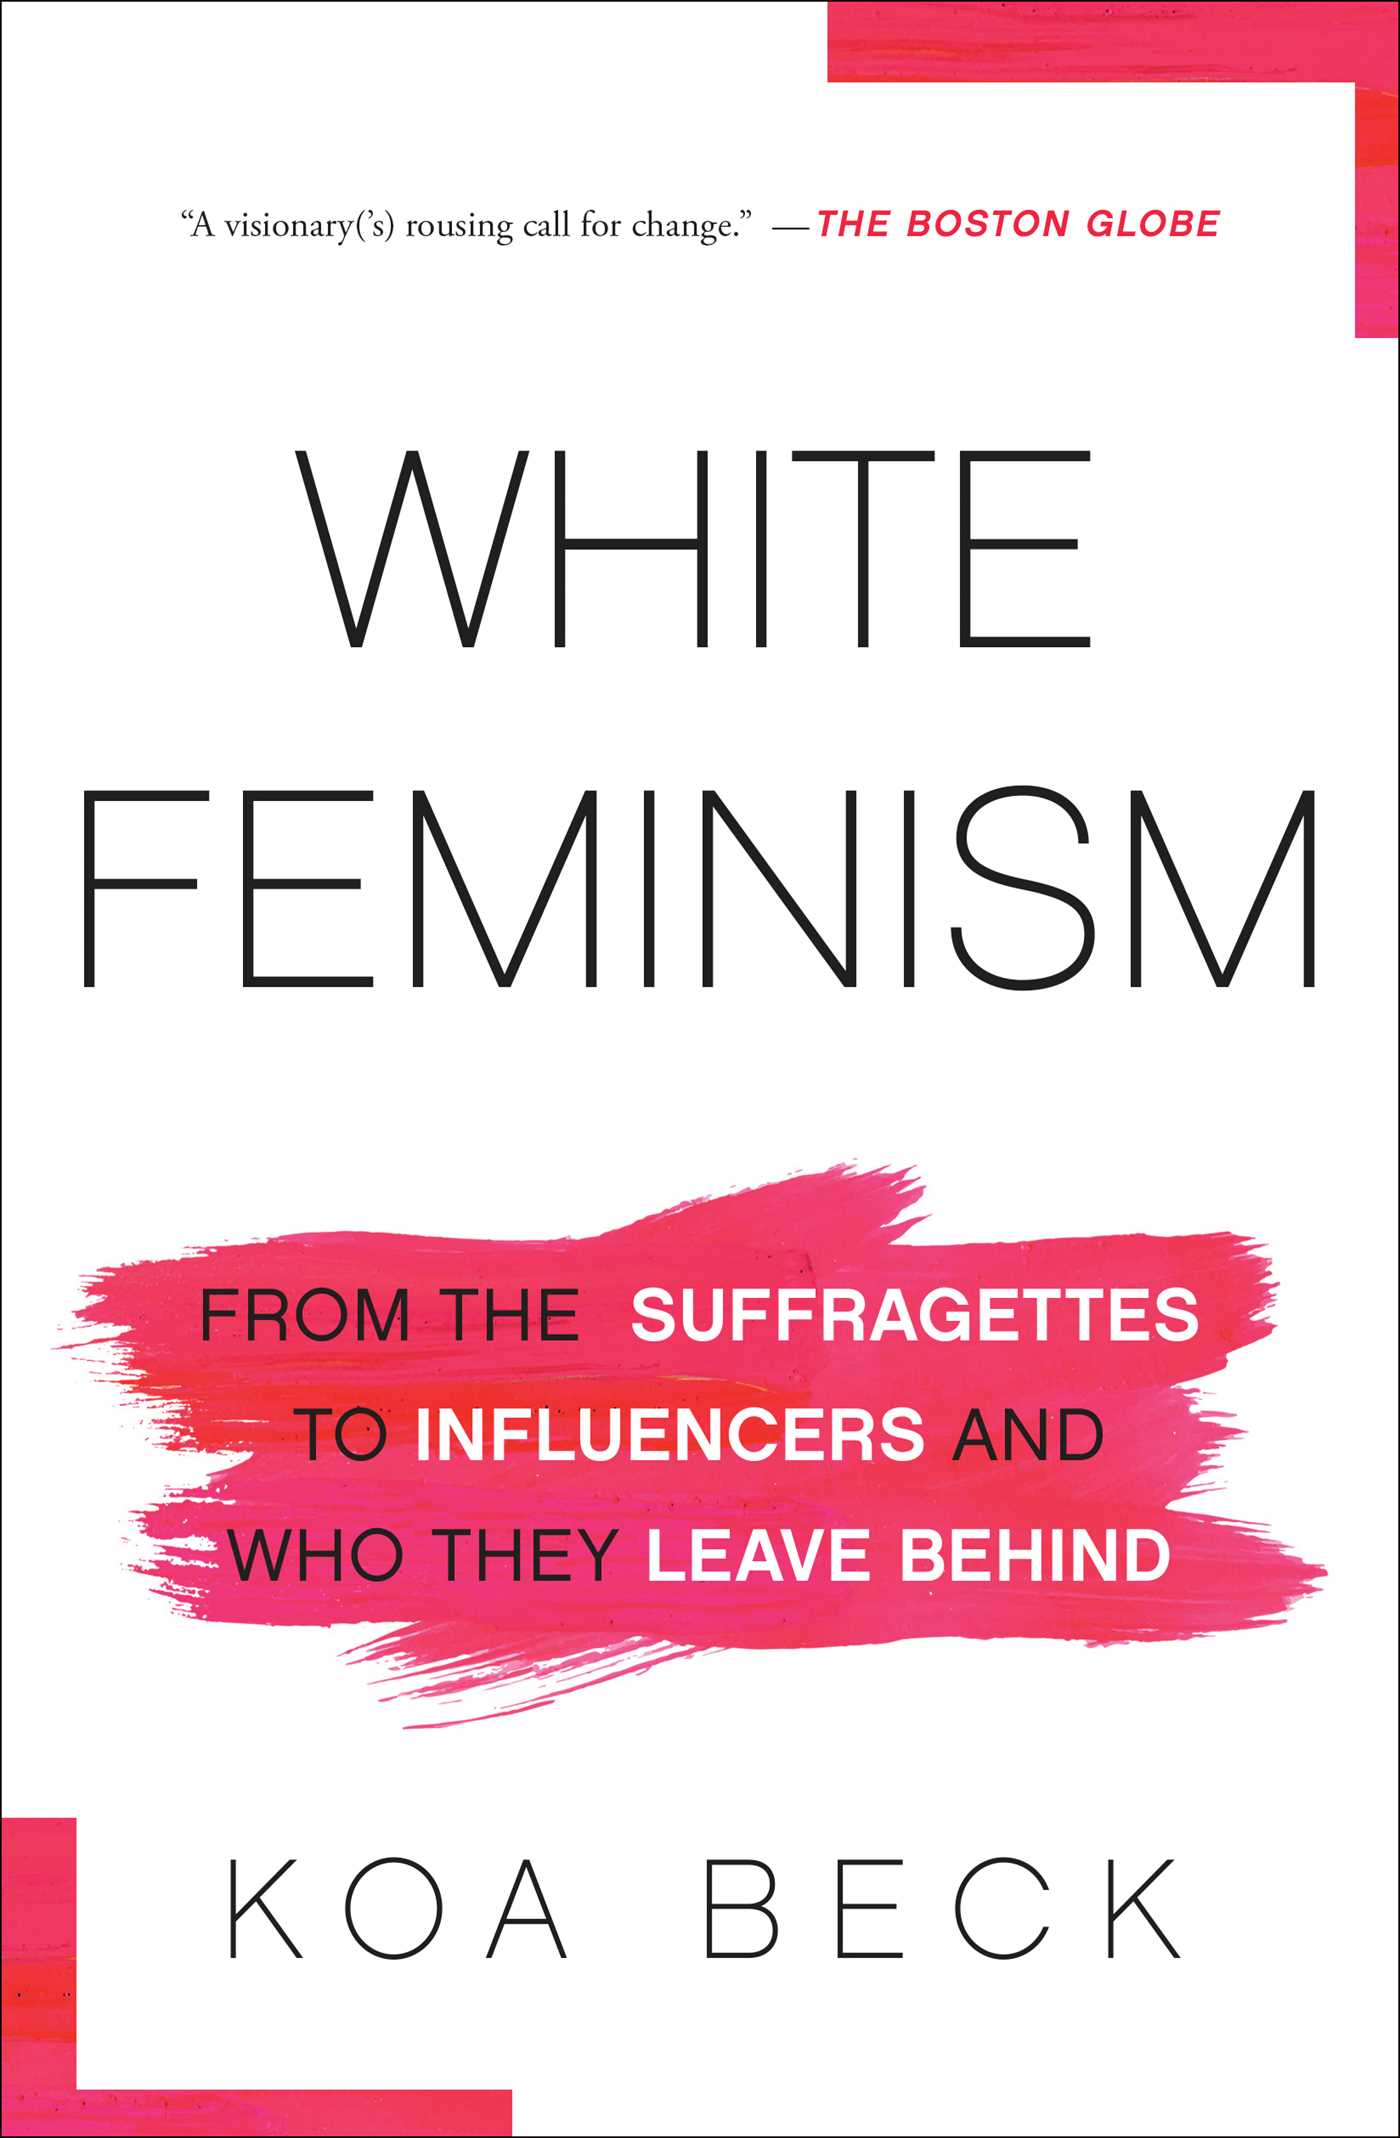 [EPUB] White Feminism: From the Suffragettes to Influencers and Who They Leave Behind by Koa Beck